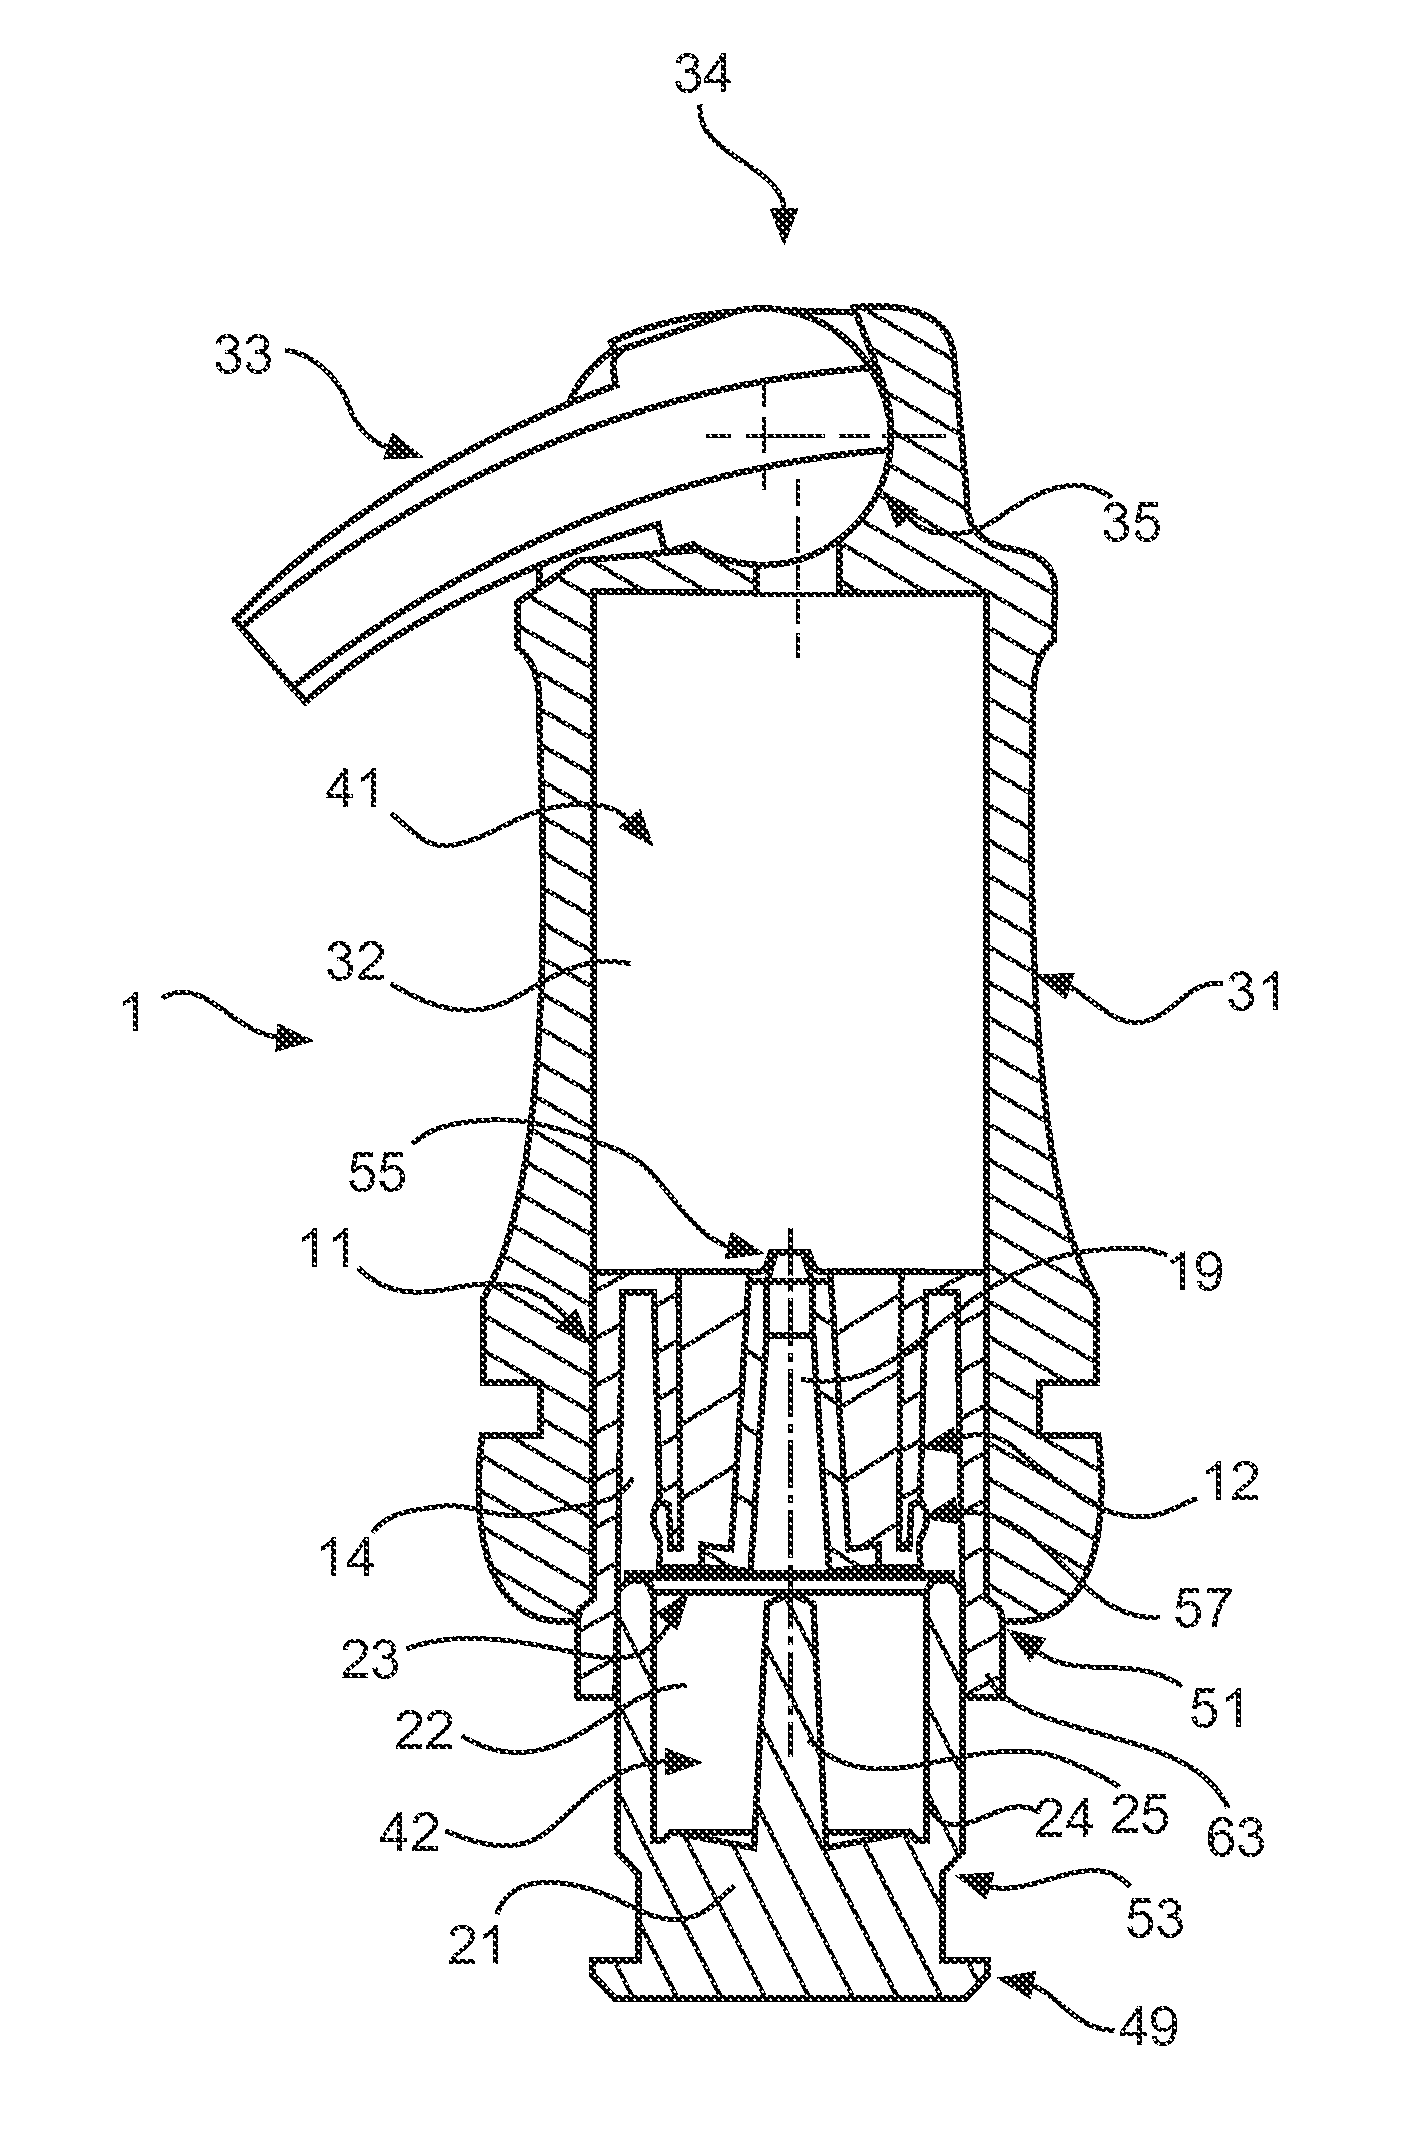 Mixing and application capsule for producing a dental preparation